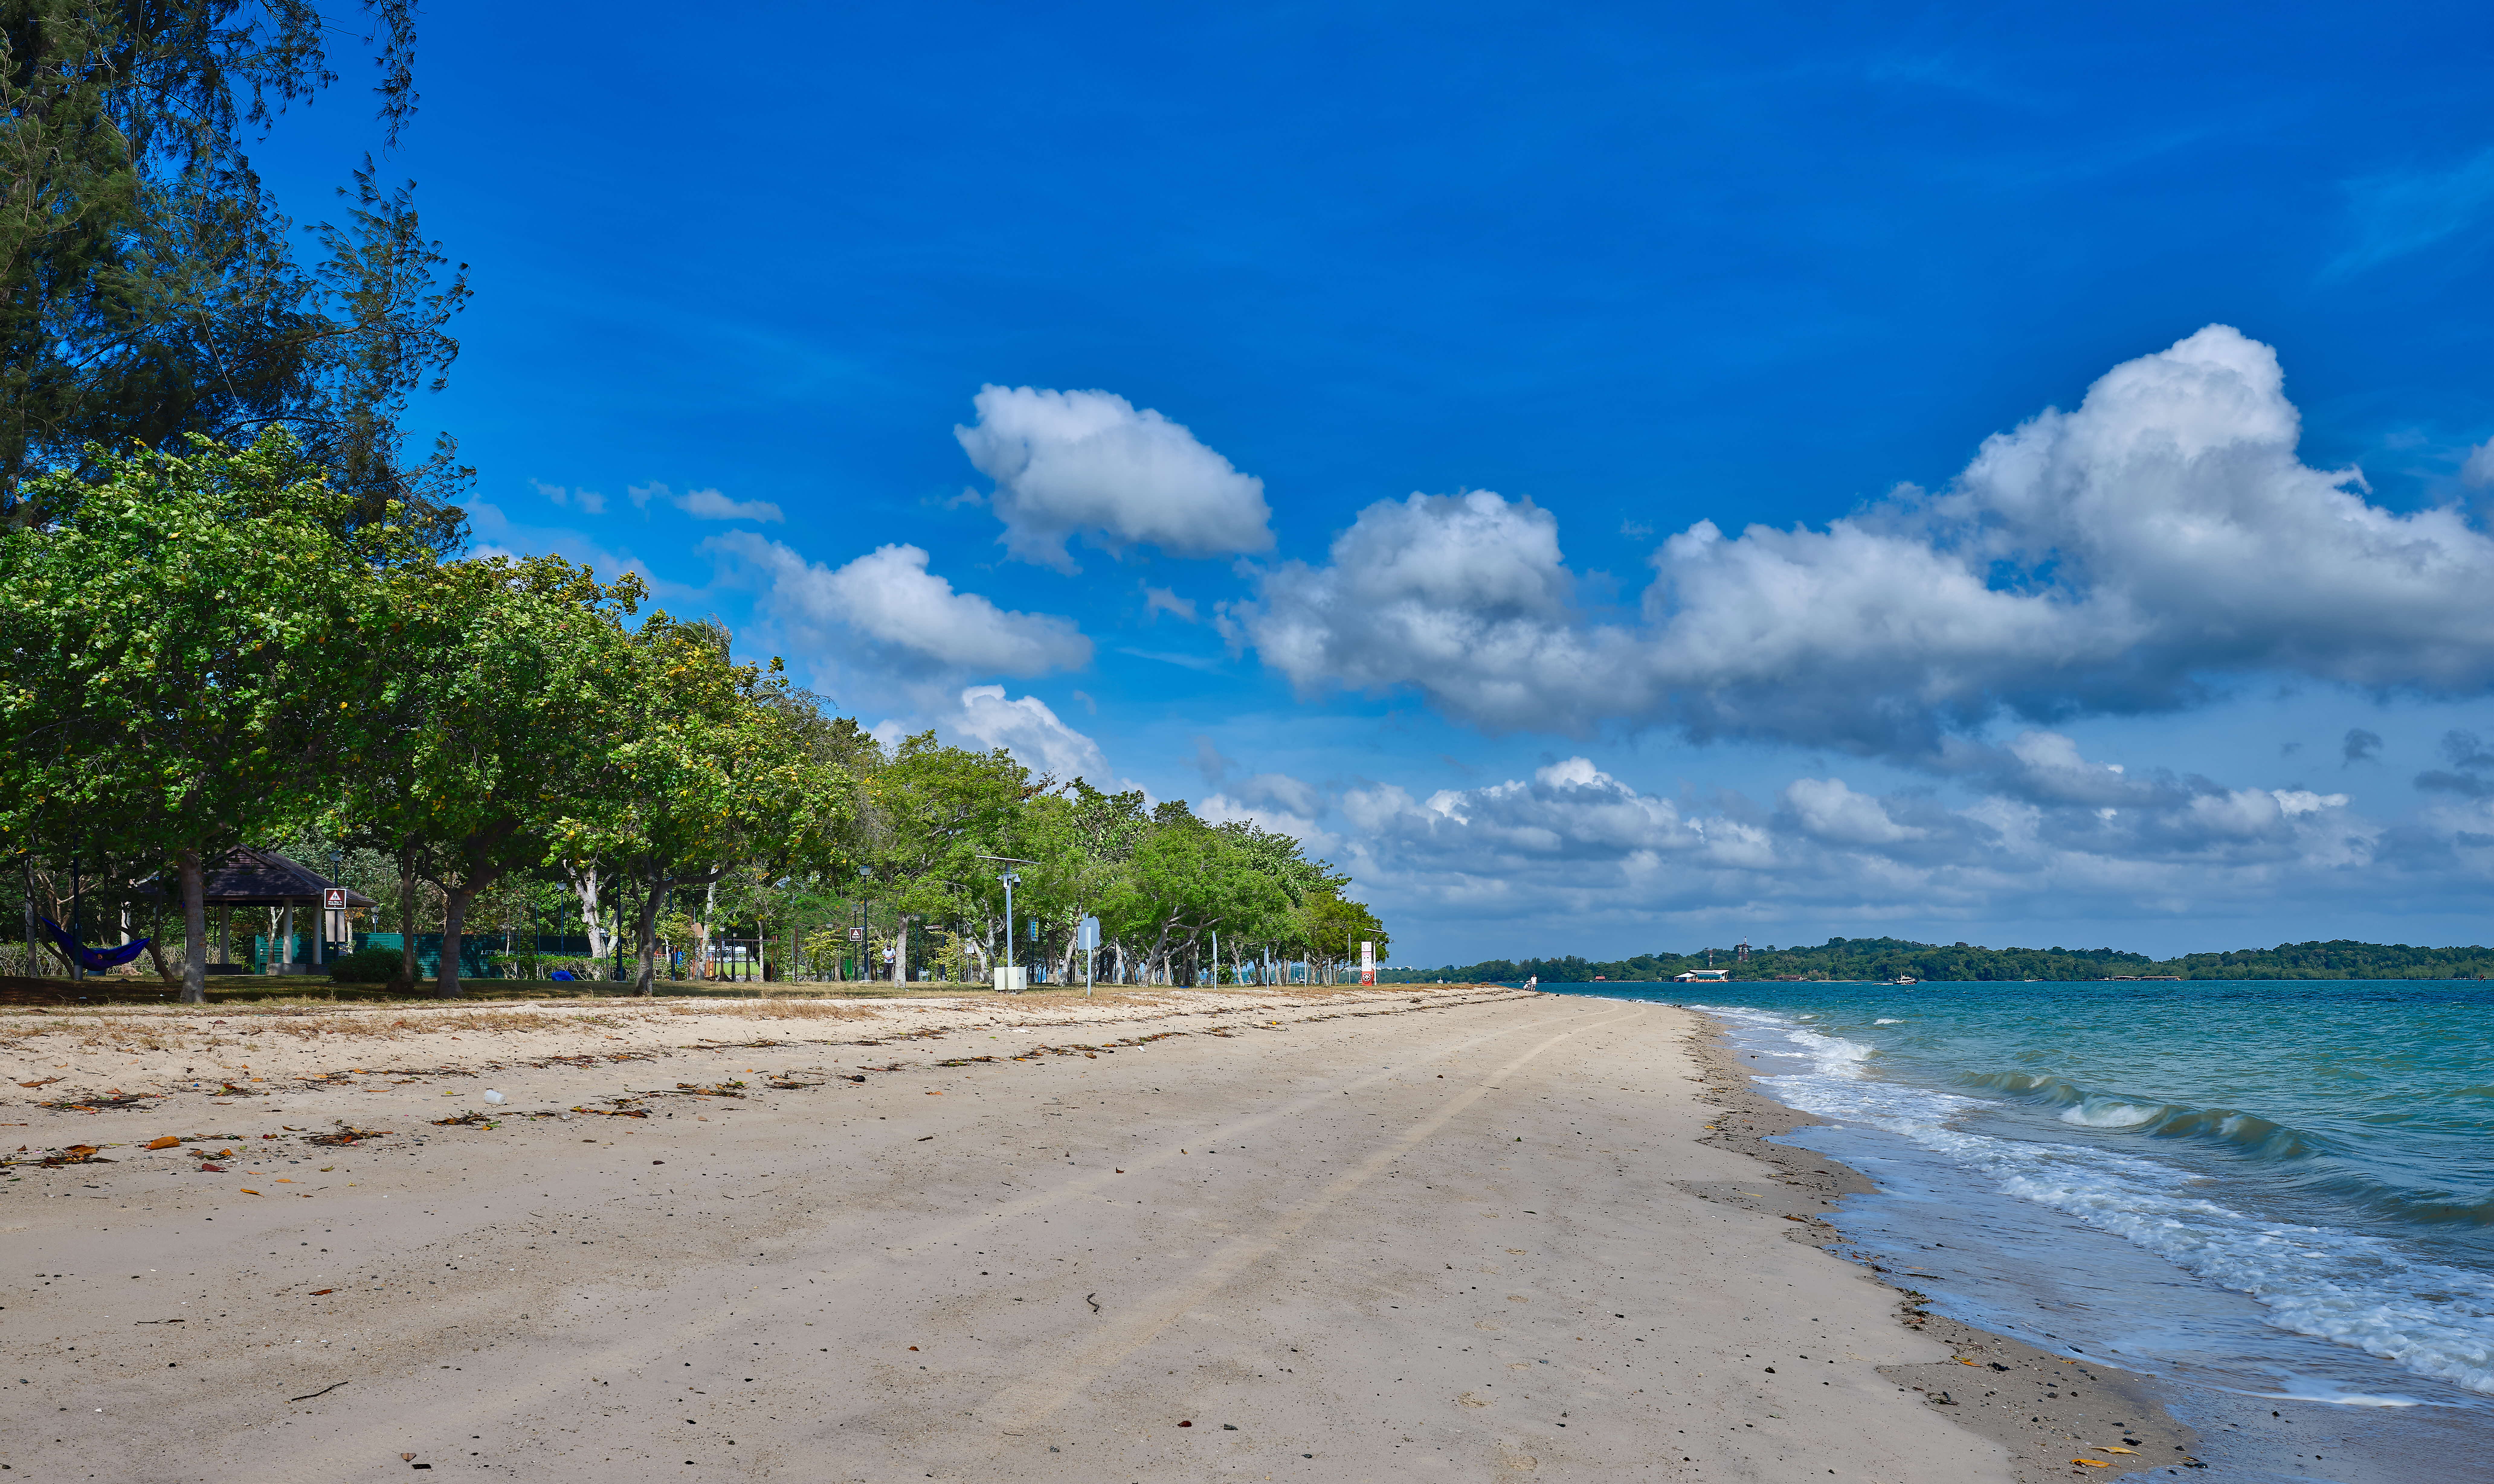 Sook Ching massacres were carried out at Changi Beach during the Japanese Occupation.